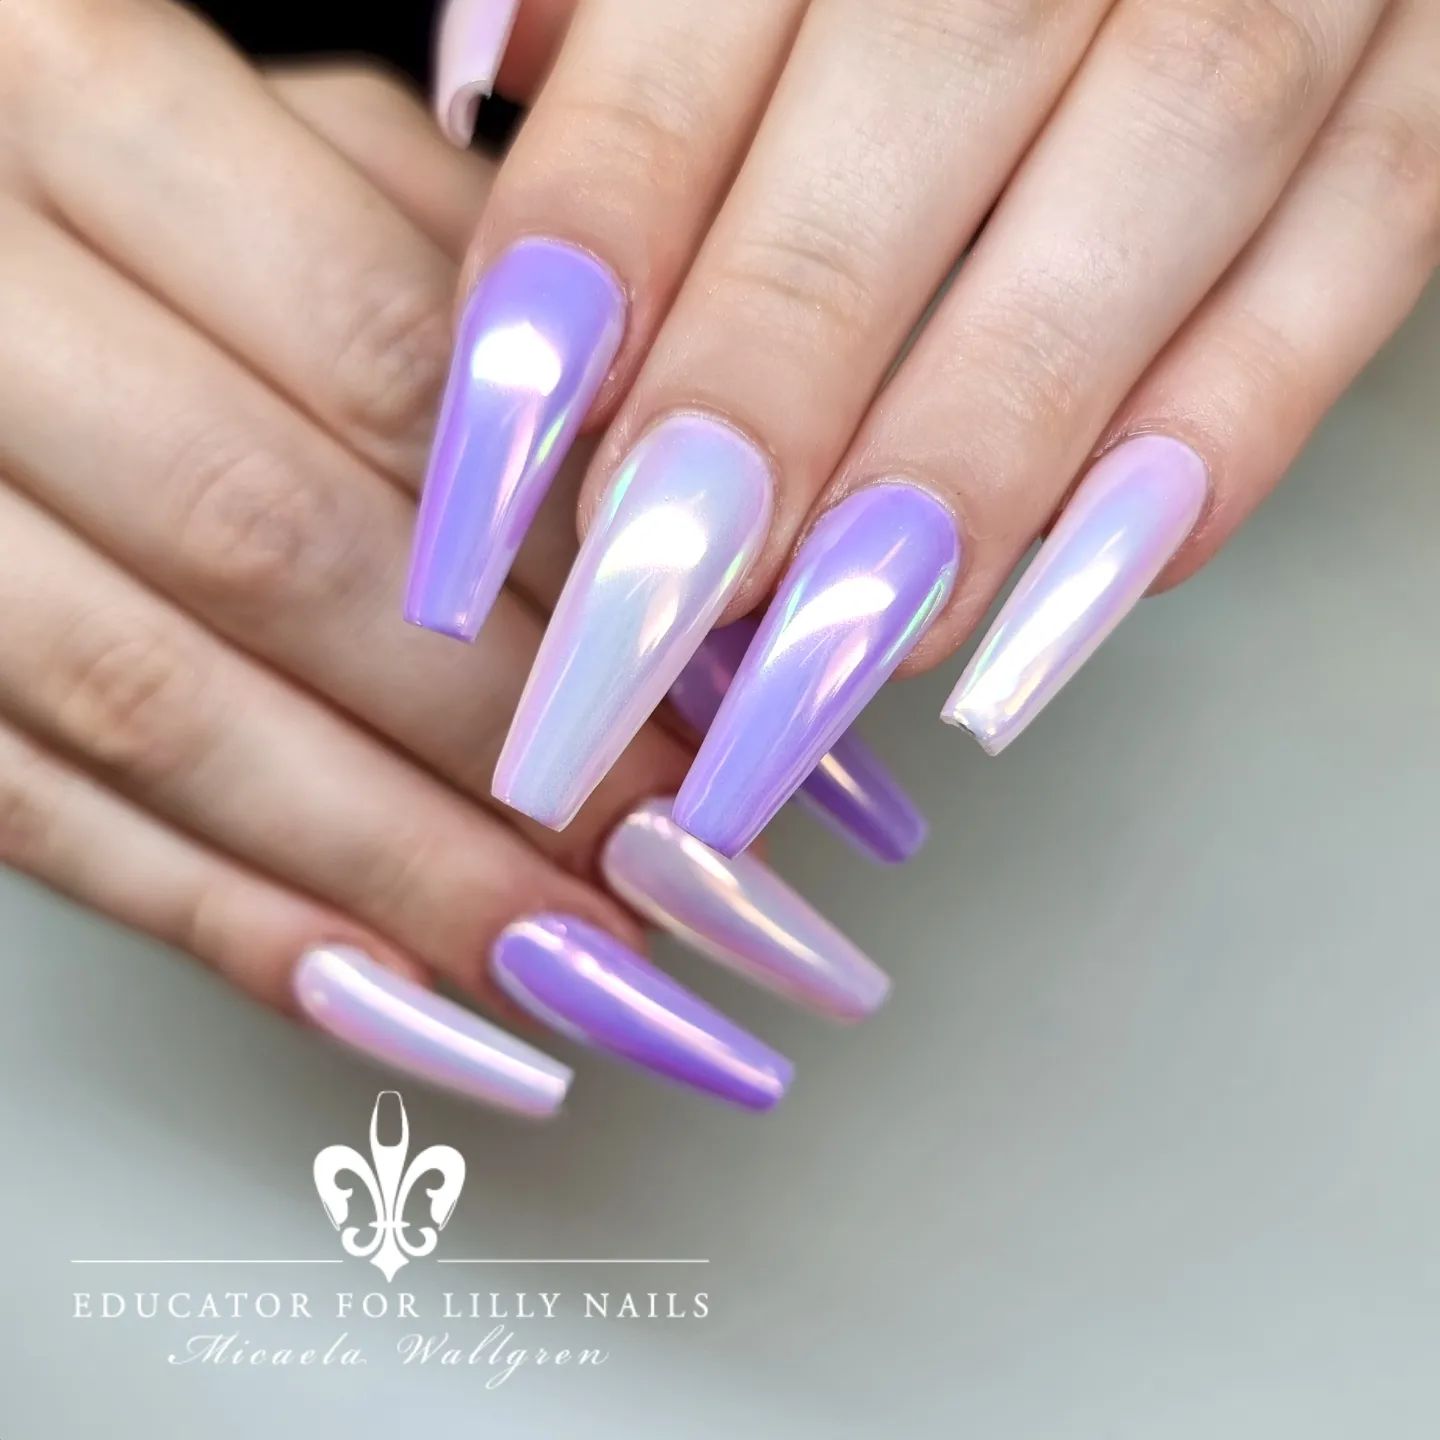 Chrome nails are made to look like the nails of a robot. They are made by painting your nails with a shiny, metallic paint and then adding a layer of clear nail polish over it so it looks shiny. Purple color is a great choice for this type of nails! 